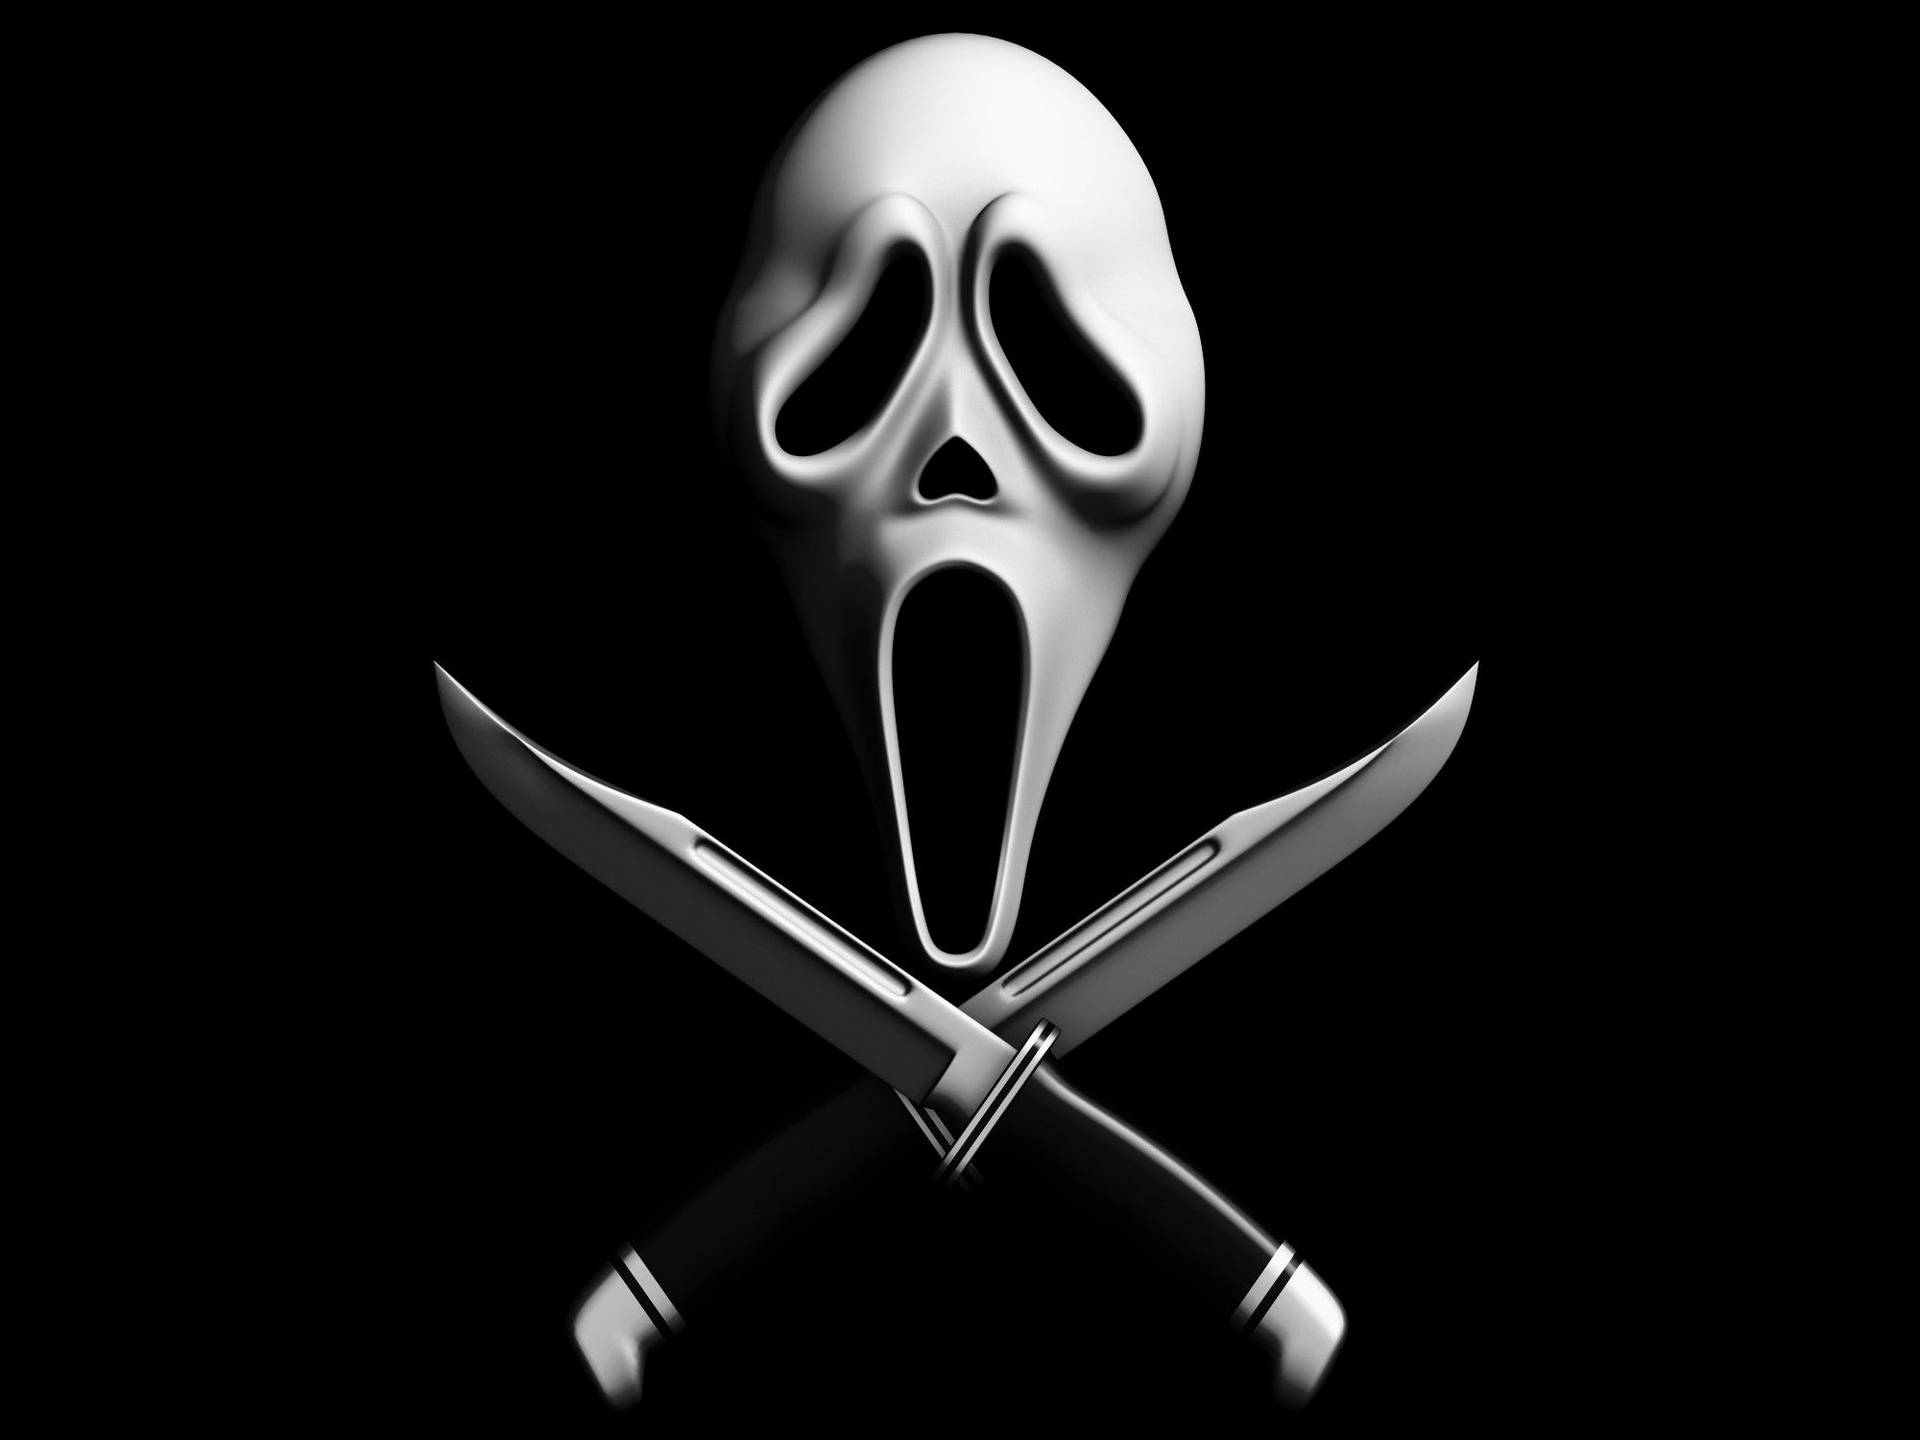 Scream Ghostface Mask On Knives Background